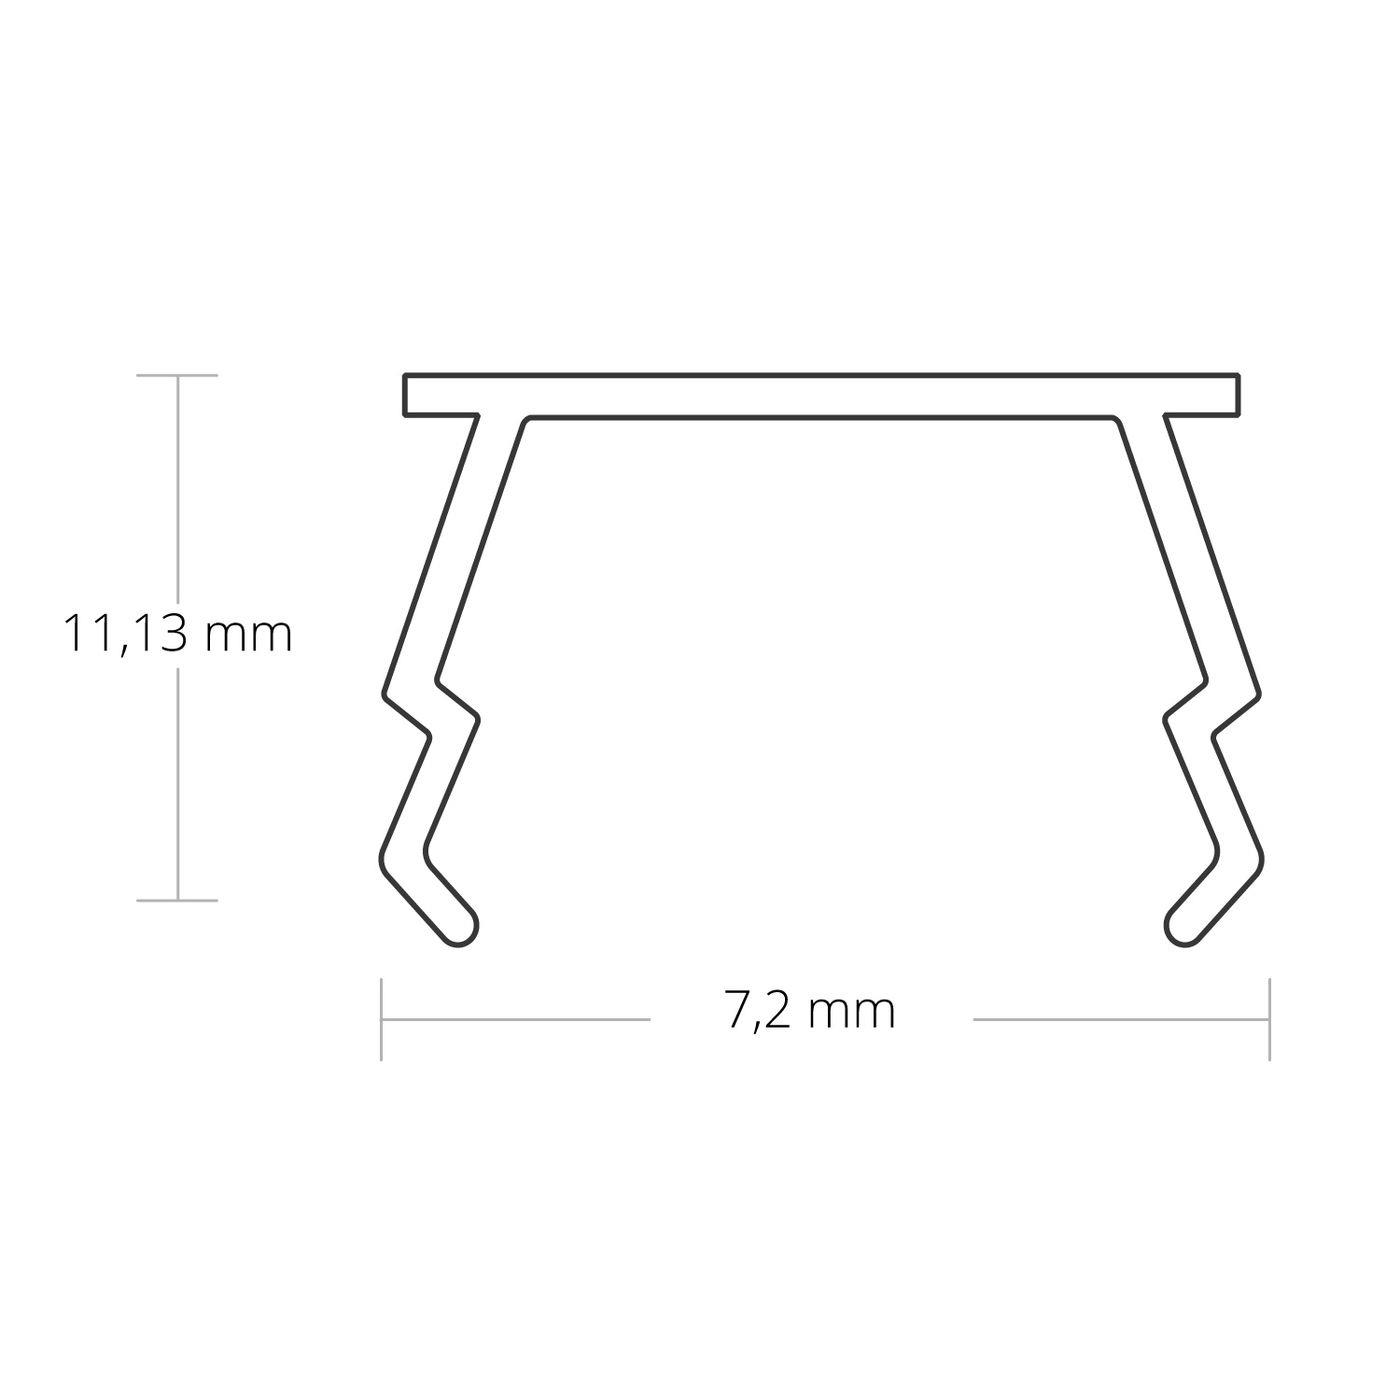 2m Cover C27 For profiles 8mm 11,1x7,2mm Plastic